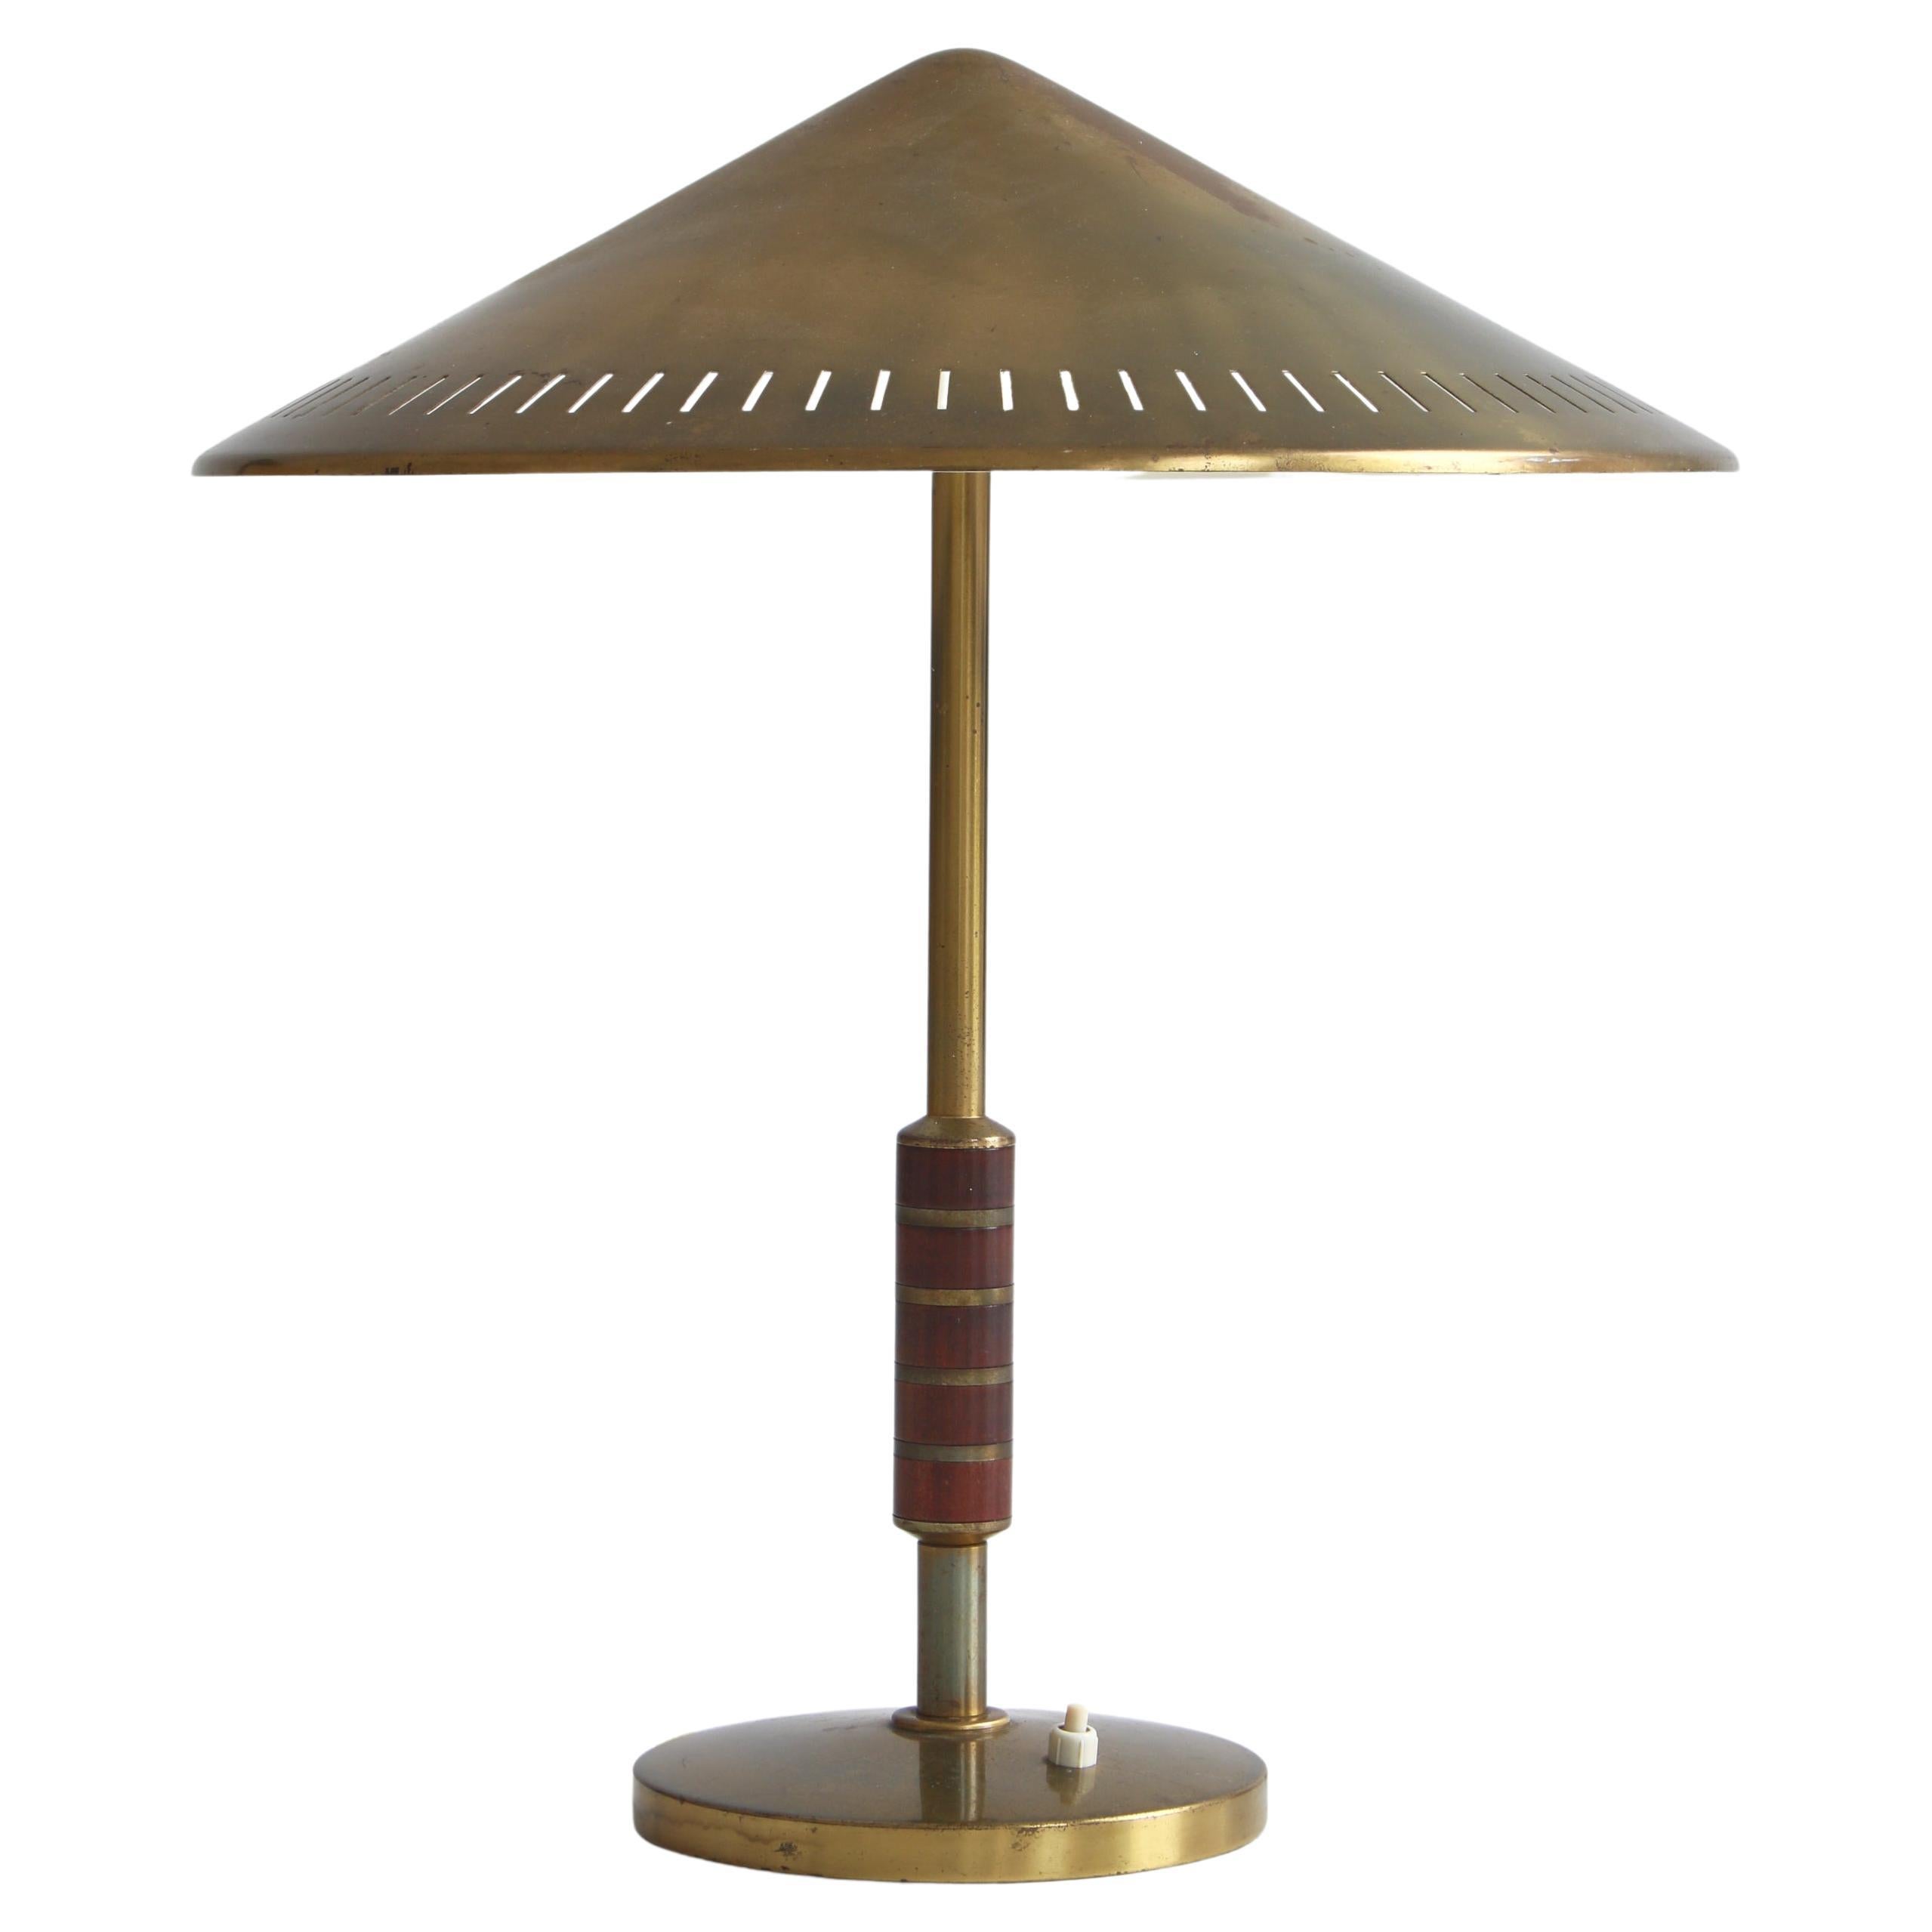 Danish Modern Brass & Mahogany Table Lamp by Bent Karlby for LYFA, 1956 For Sale